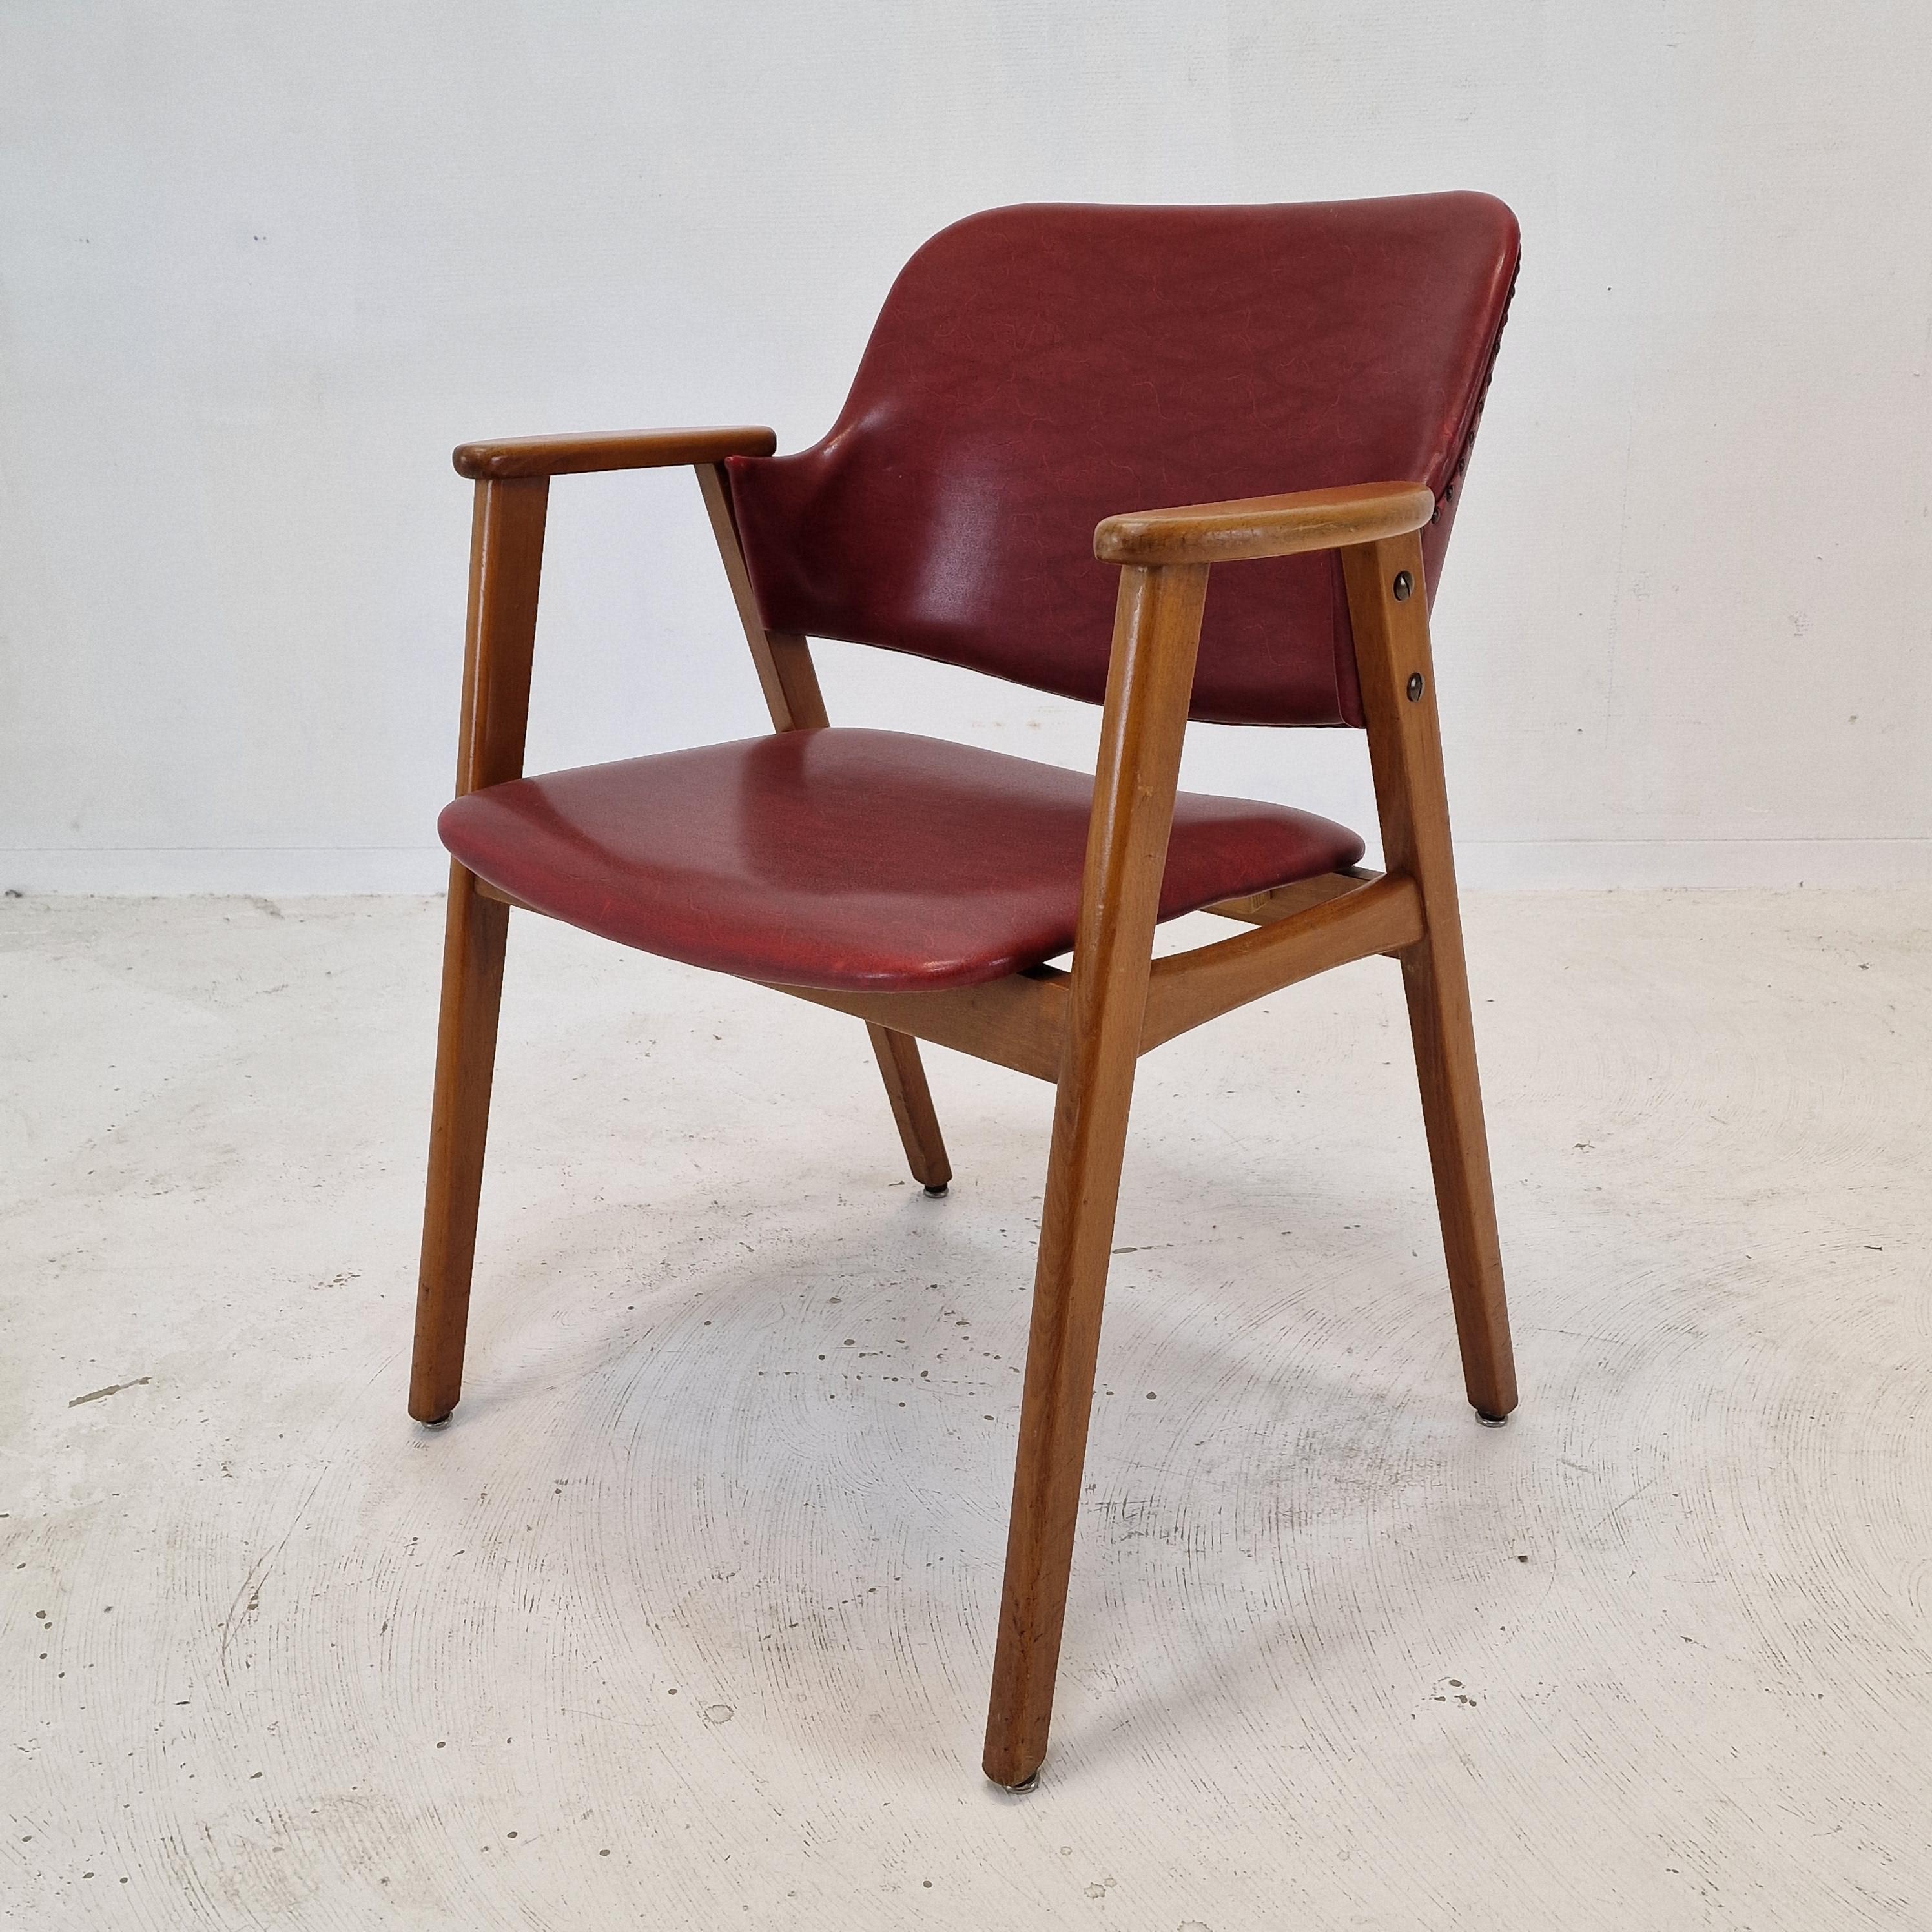 Dutch Midcentury Dining or Restaurant Chairs by Cees Braakman for Pastoe, 1950s For Sale